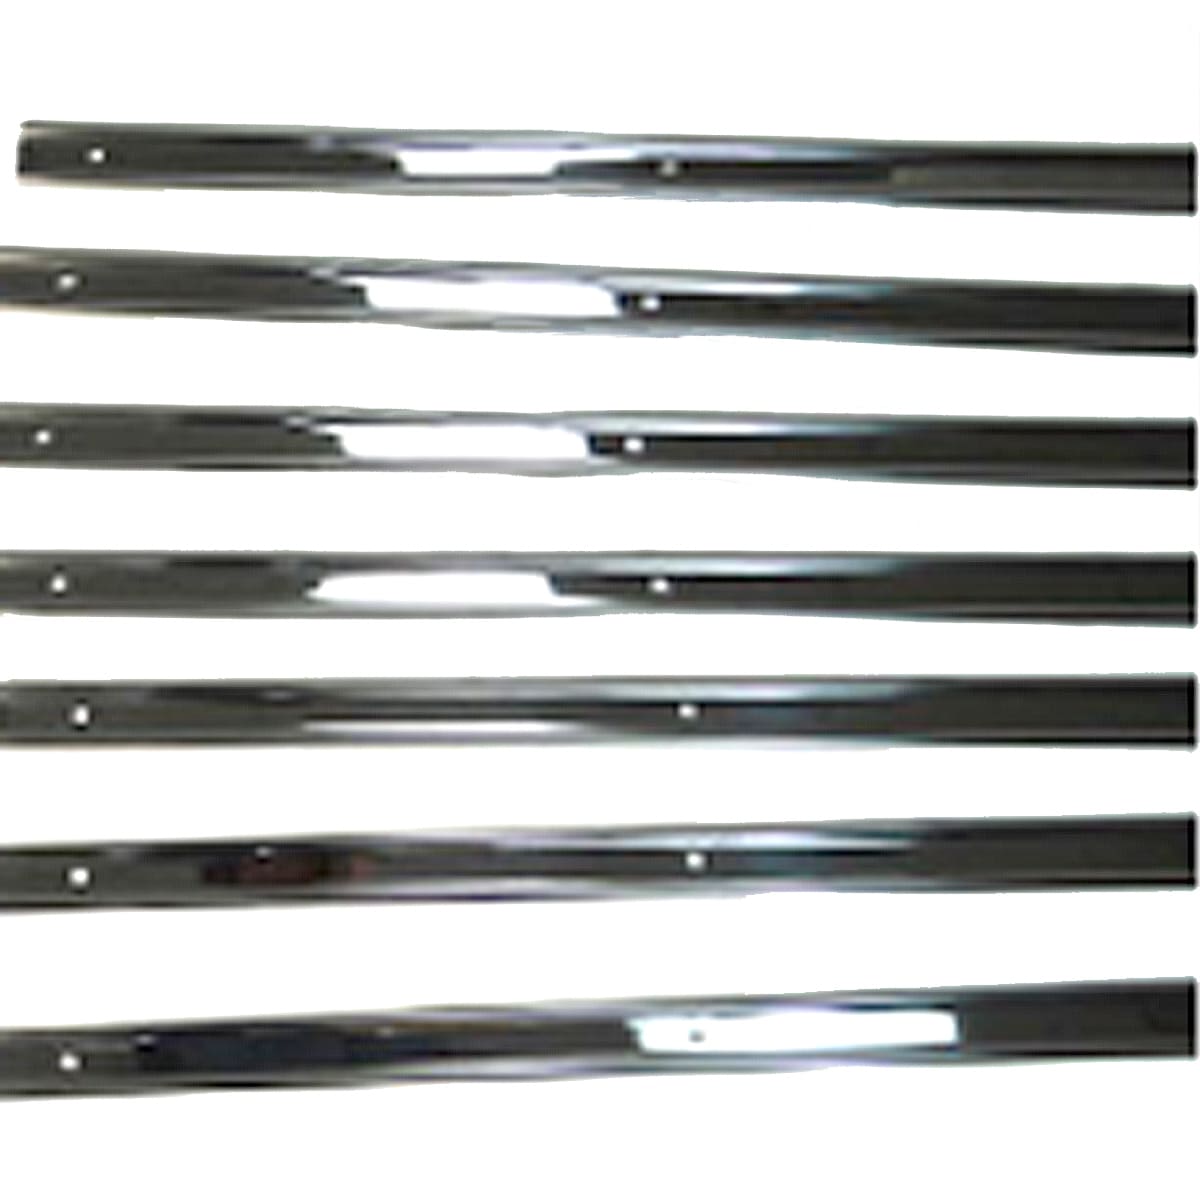 1967-1972 High Polished Stainless Steel Bed Strips Mirror Finish Chevrolet and GMC Pickup Truck